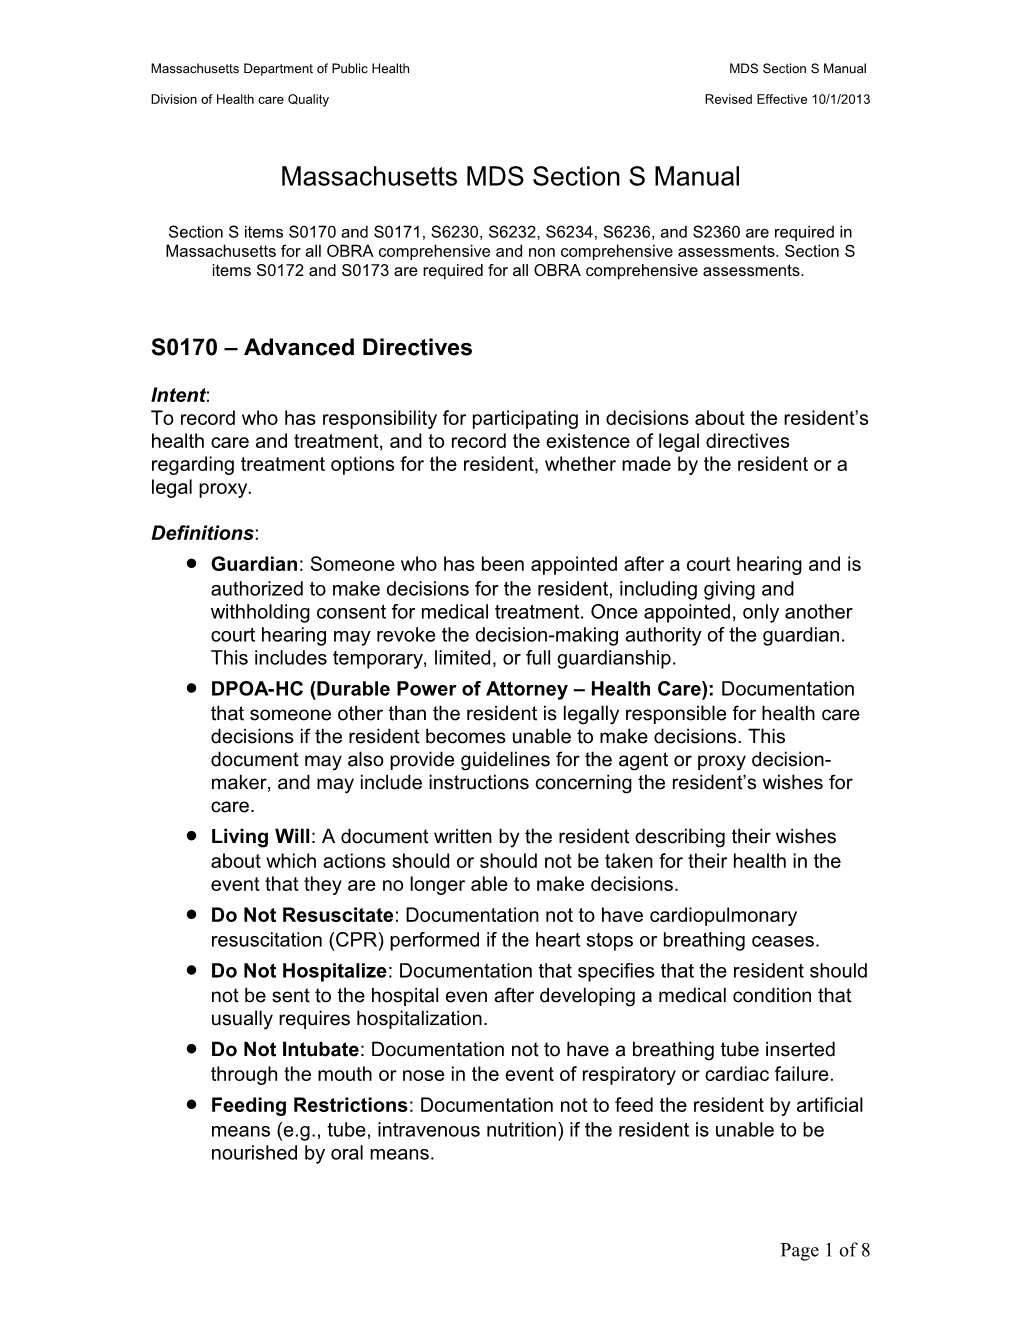 Massachusetts MDS Section S Manual